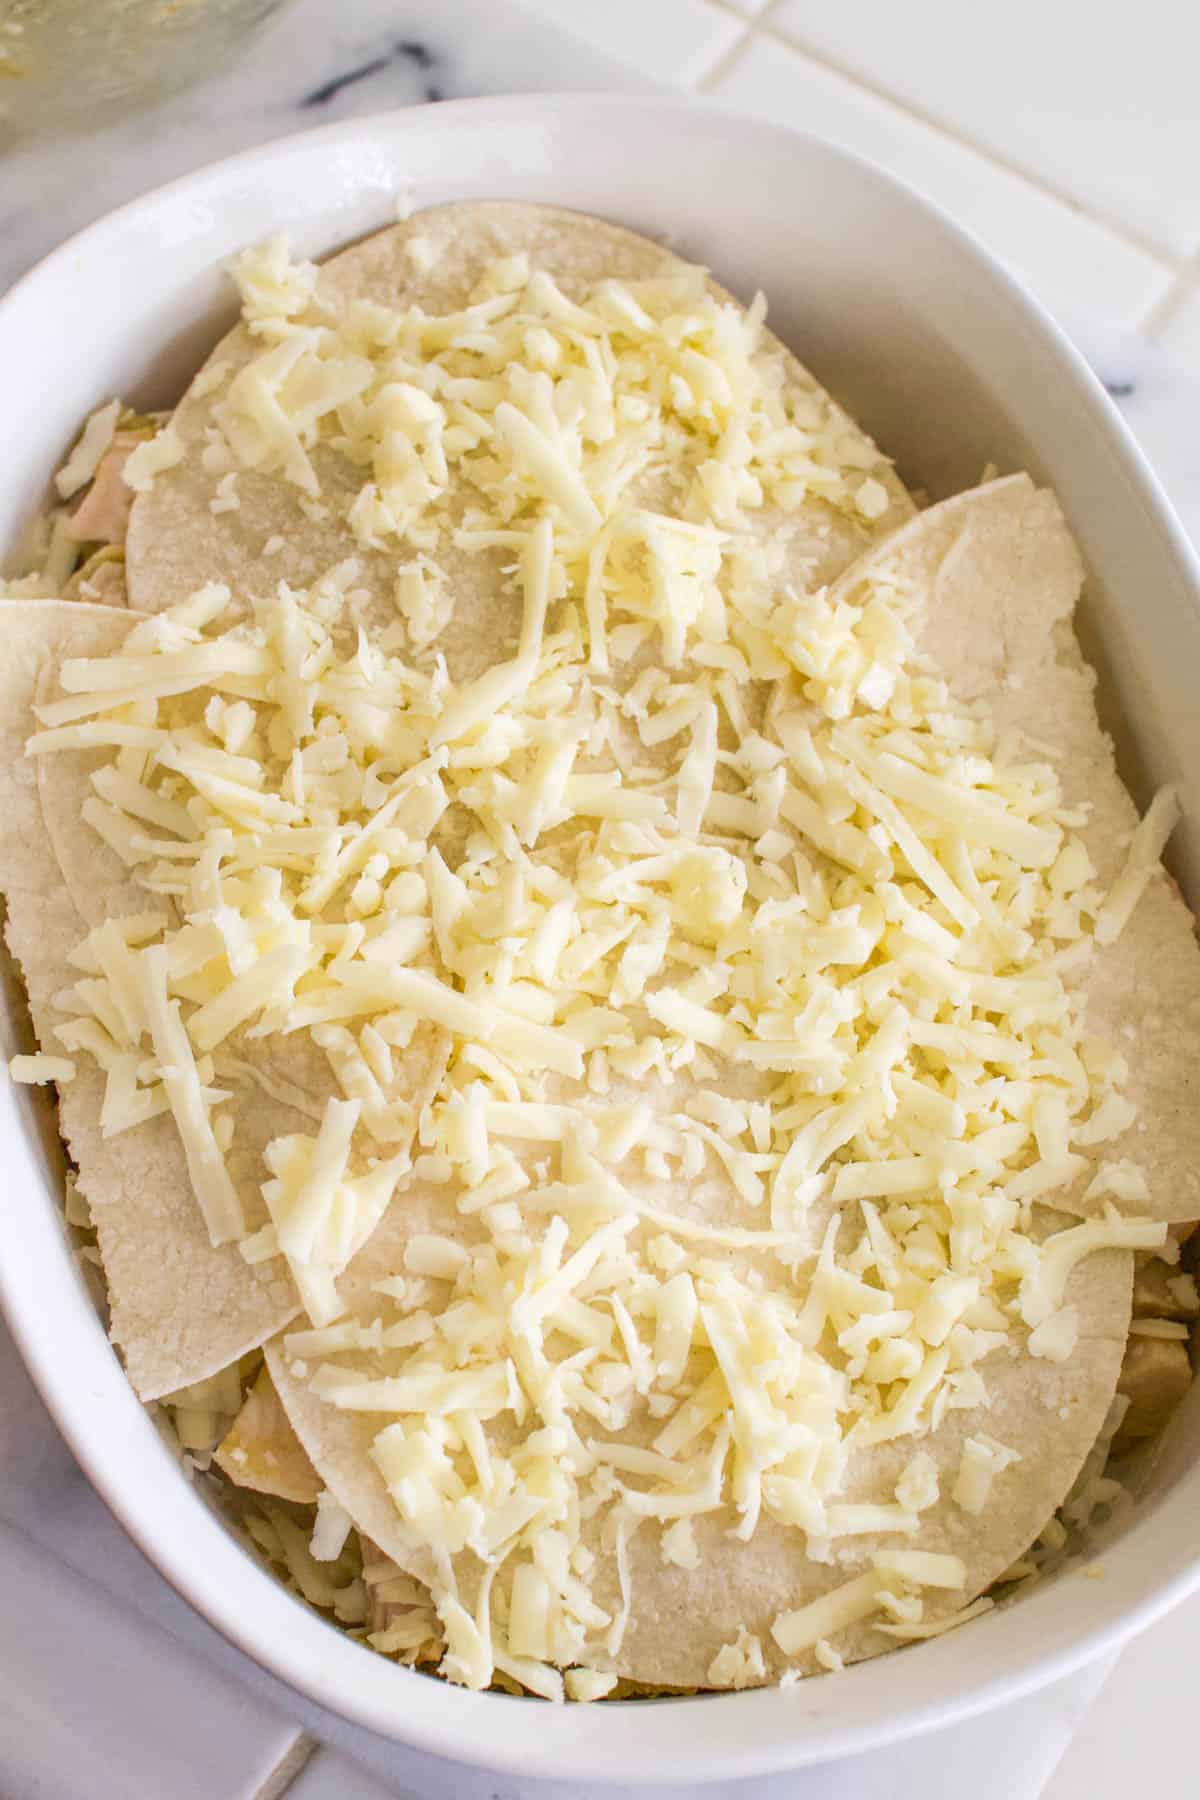 Baking dish with layered chicken, cheese and tortilla for a casserole.